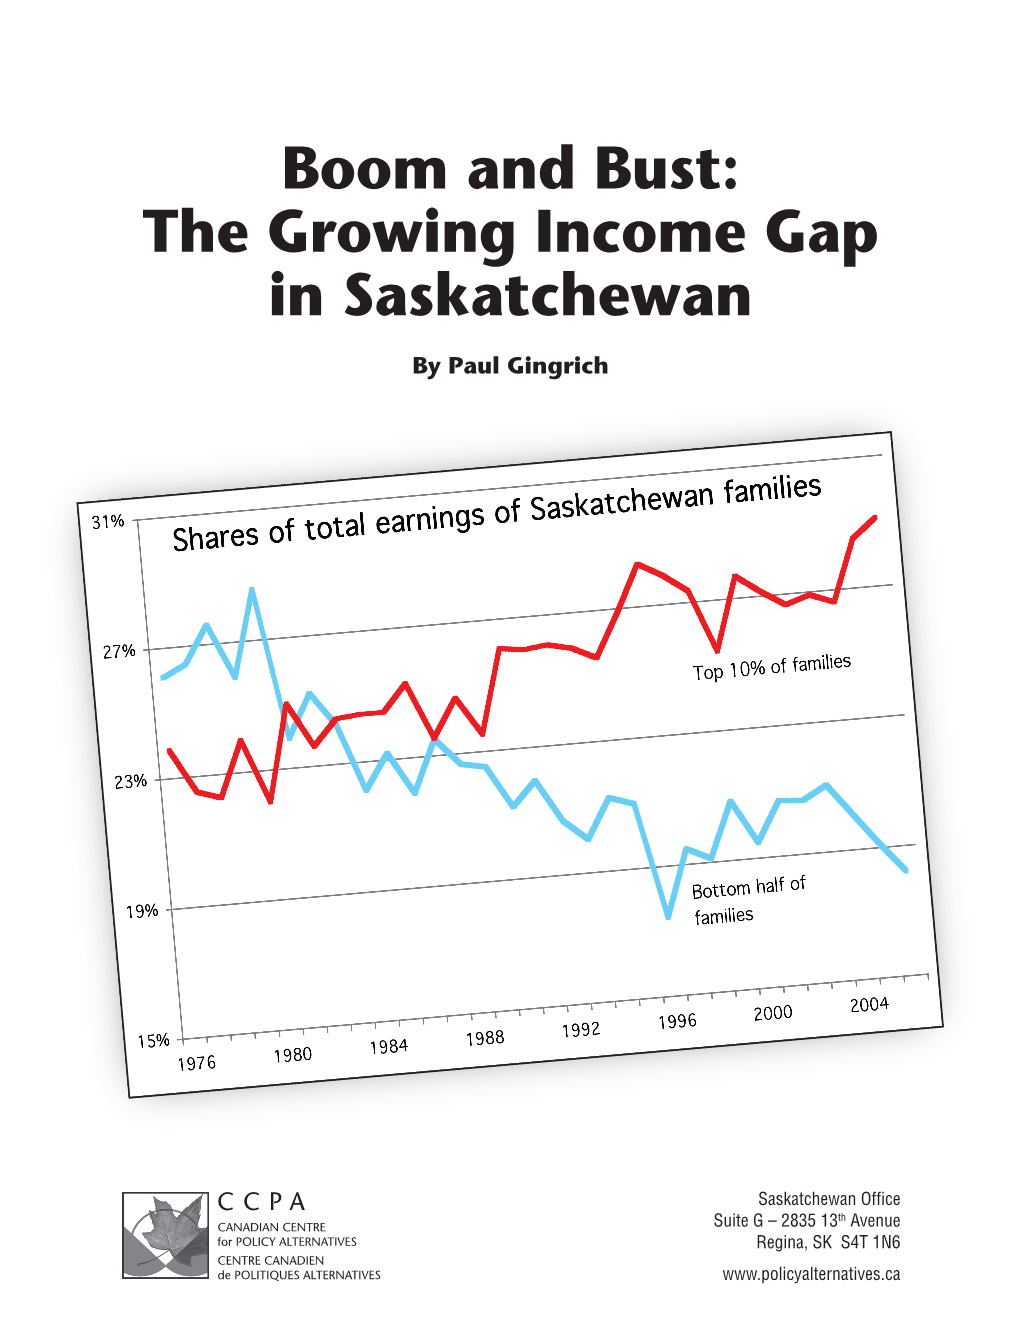 Boom and Bust: the Growing Income Gap in Saskatchewan